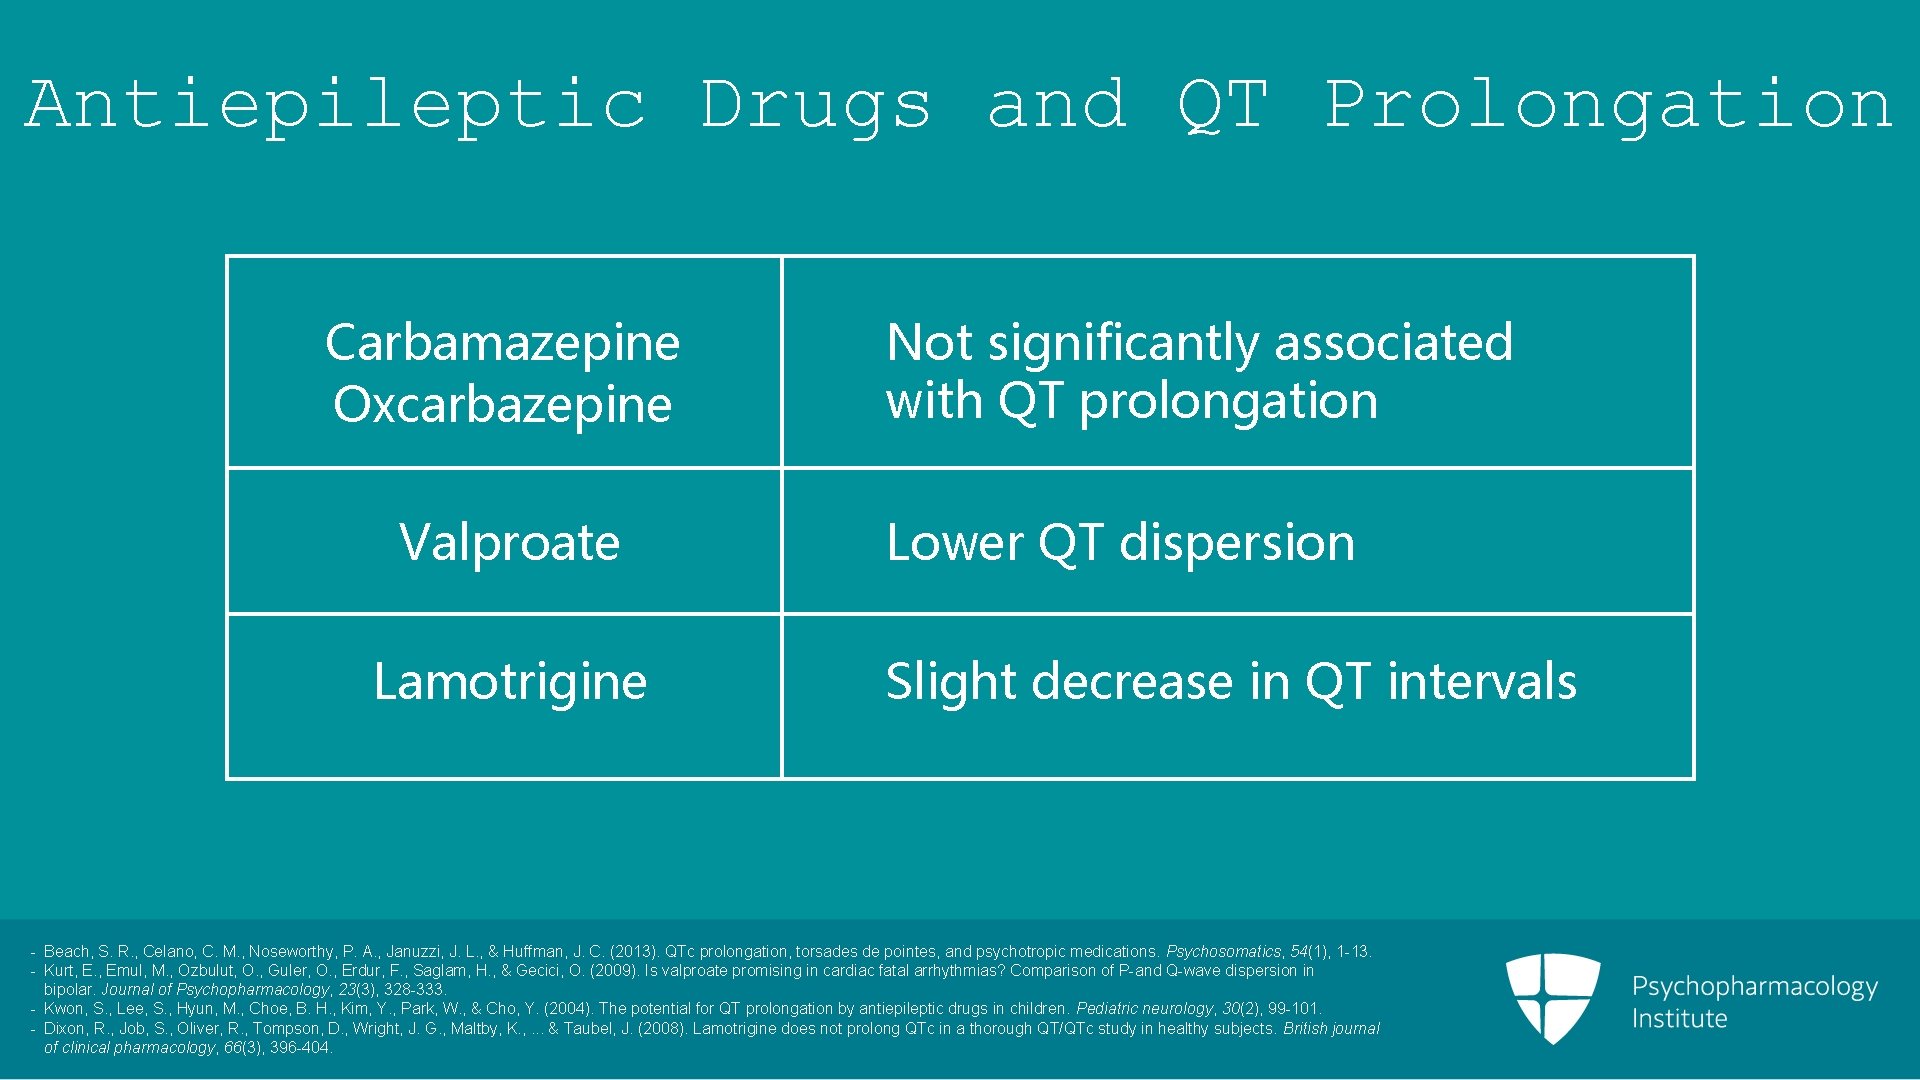 Antiepileptic Drugs and QT Prolongation Carbamazepine Oxcarbazepine Valproate Lamotrigine Not significantly associated with QT